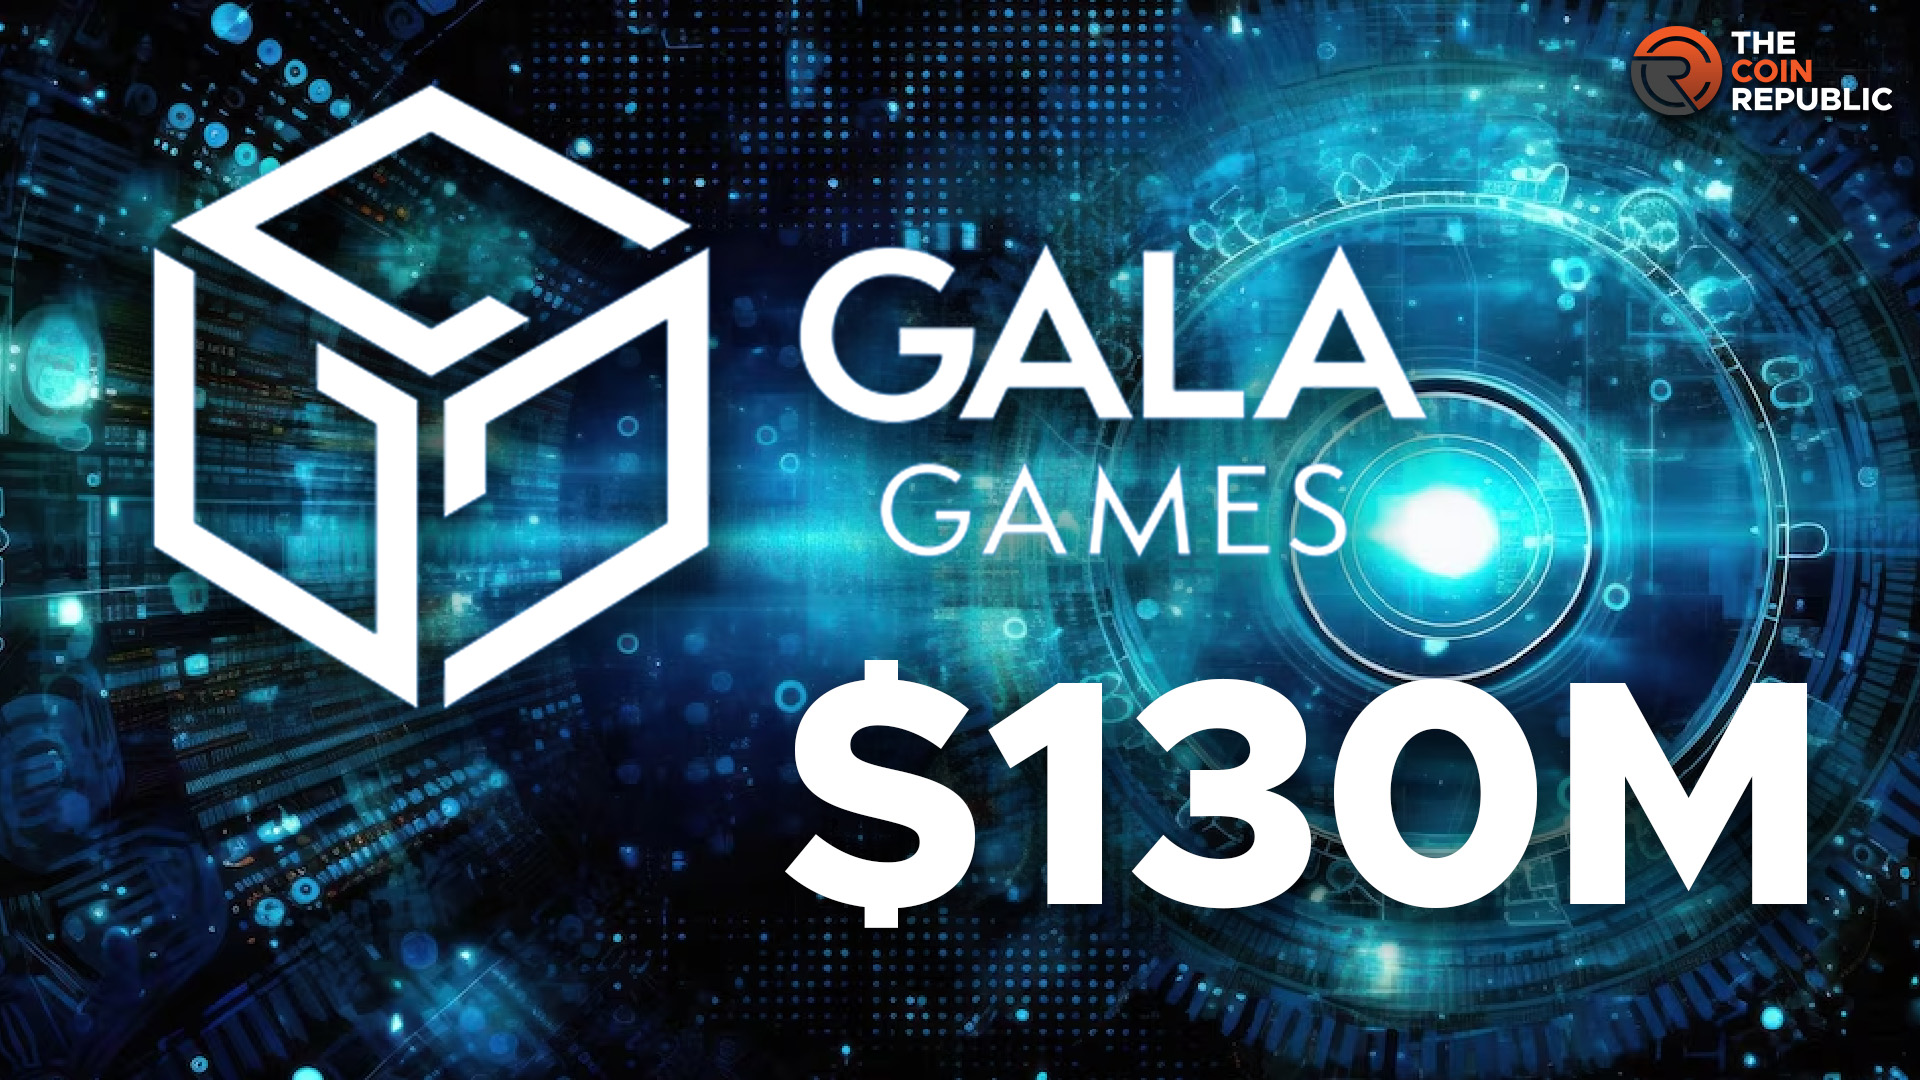 Gala Games “Fight Mode is ON” Amid its CEO and Co-Founder